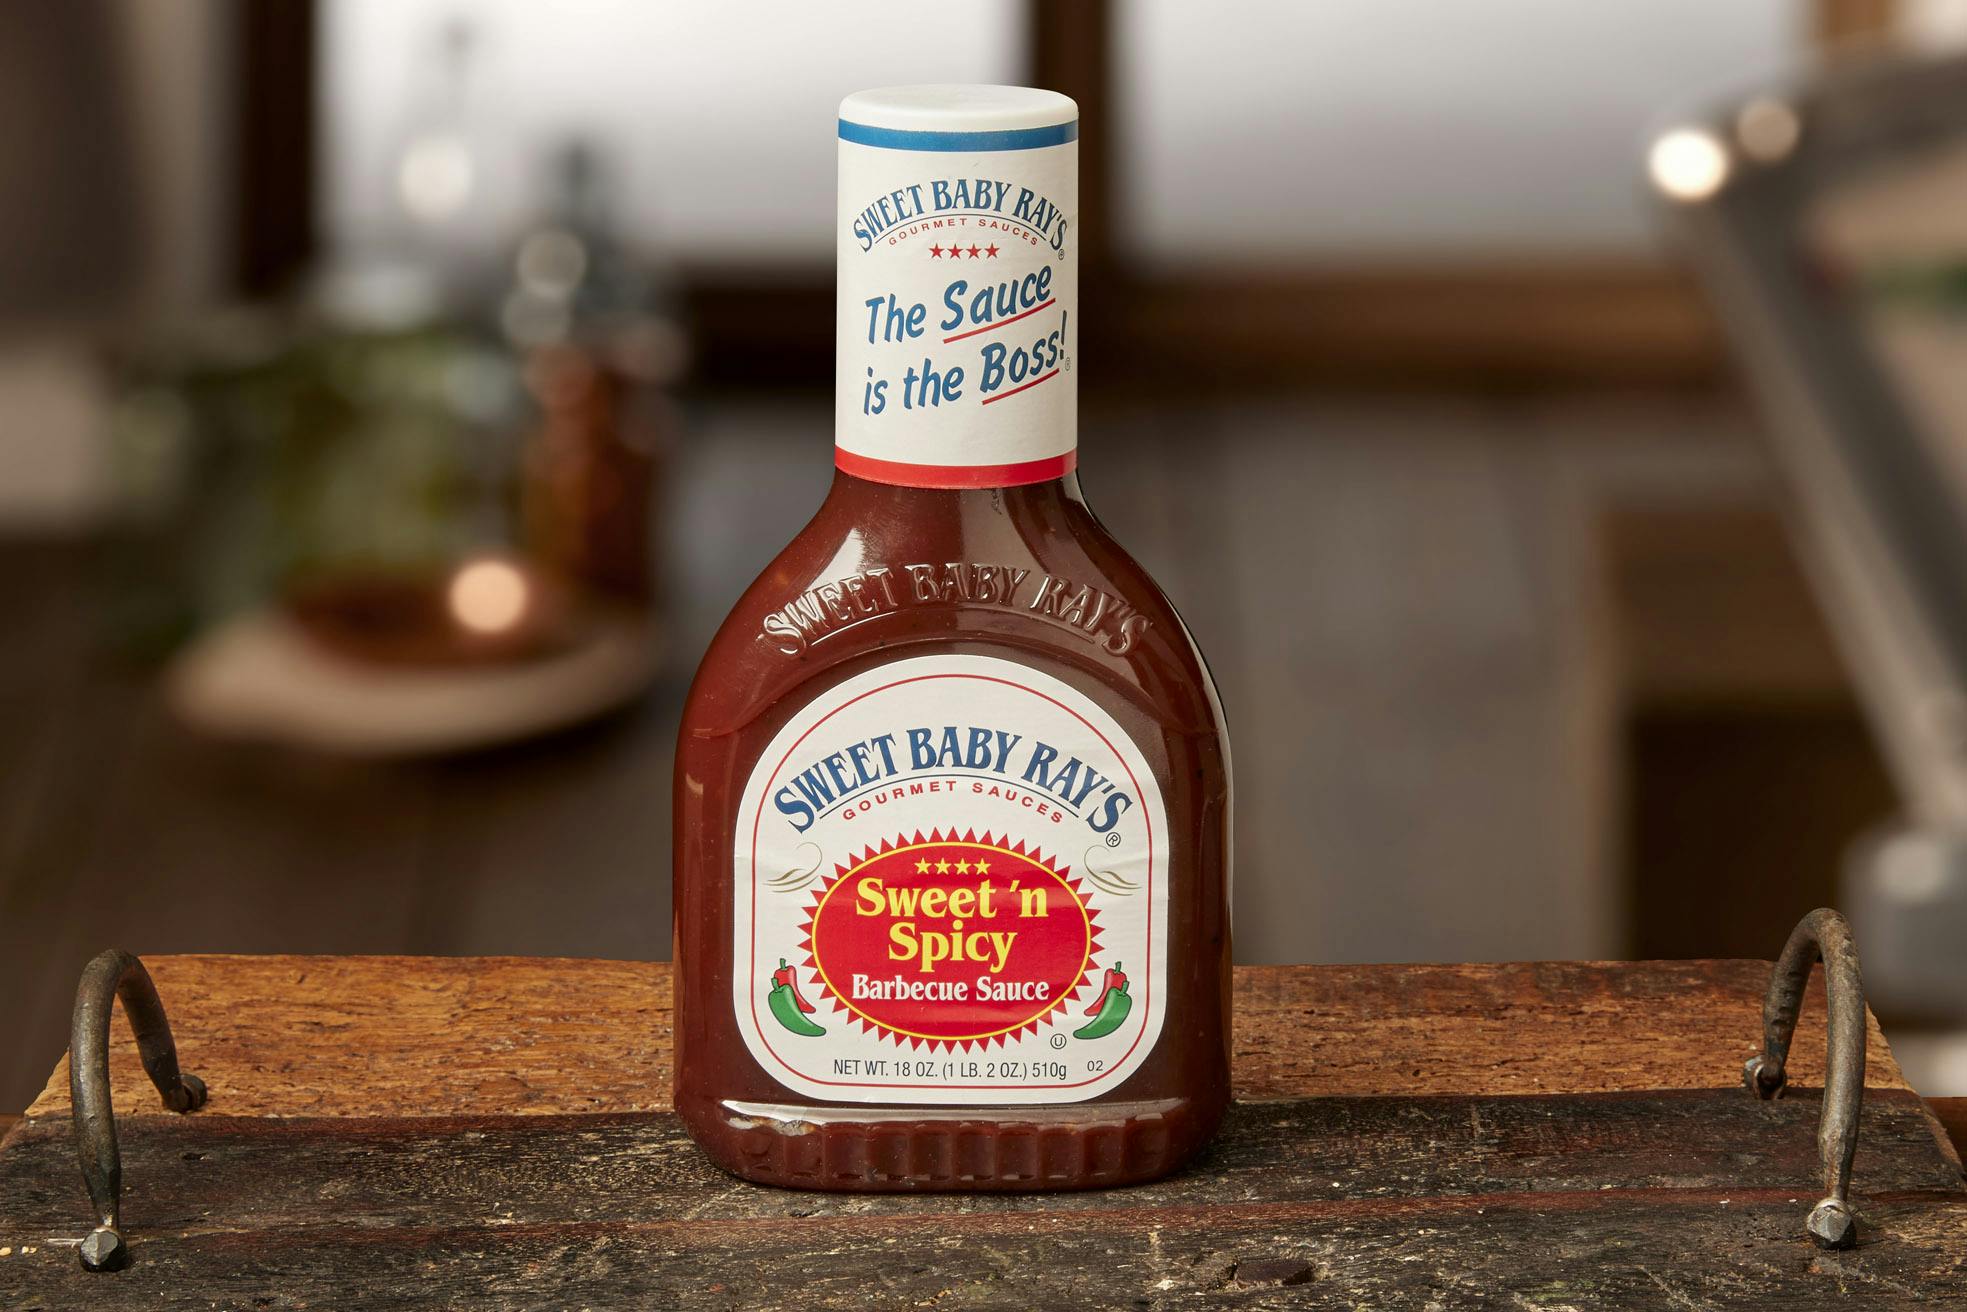 Sweet Baby Ray Sweet and Spicy BBQ Sauce